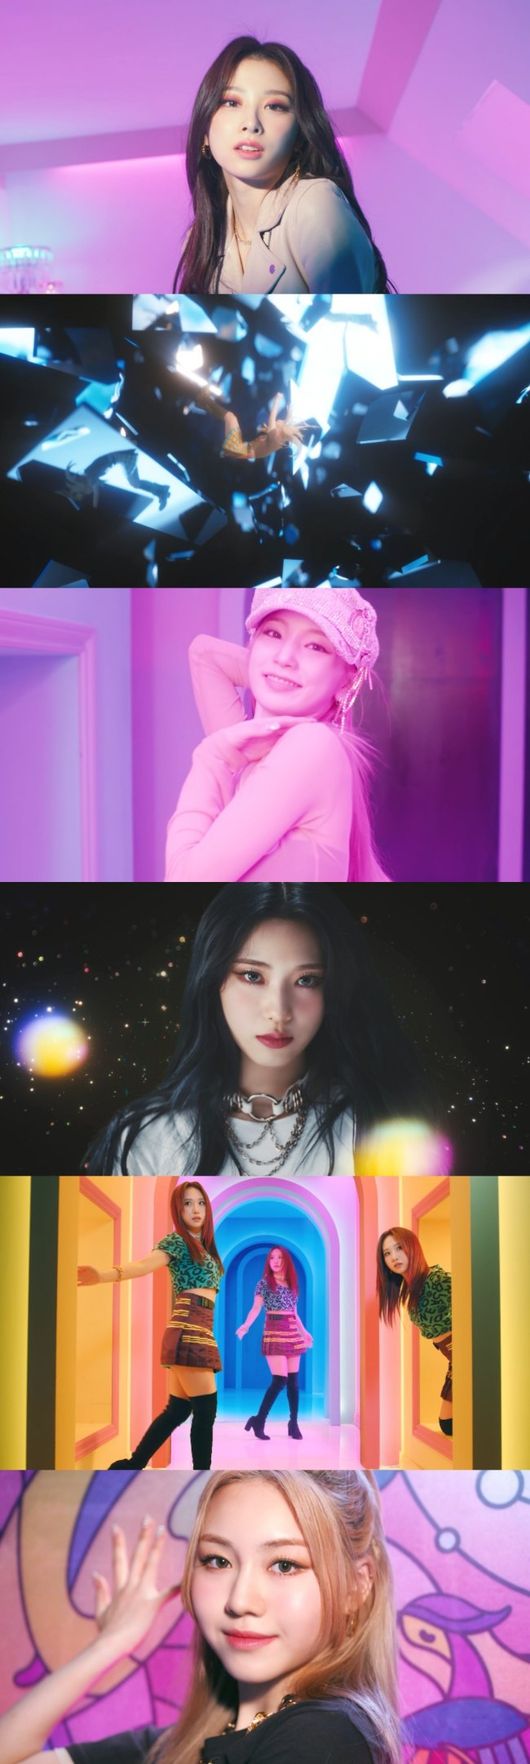 The group Rocket Punch (Rocket Punch, Michelle Chen Juri Suyun Yunkyoung Sohee Dahyun) announced the start of a colorful runway with a new music video teaser.Woollim Entertainment, a subsidiary company, released a music video teaser for the title song Chikita (CHIQUITA) on Rocket Punchs fourth mini album YELLOW PUNCH at 0:00 on the 23rd via official SNS and YouTube channels.Rocket Punch in the music video teaser showed off his unique visuals in a colorful space of mysterious and dreamy moods.Rocket Punchs chic and imposing energy, which seems to penetrate the teaser video, also made global fanship thrilling.Especially, Michelle Chen, the last teaser, focused attention on the back of the rush to the place where bright light is pouring.This signaled that the brilliant runway of Rocket Punch, which can not be taken off, will start in earnest, raising expectations for a reversal comeback.Chikita, a mixture of disco and Eurodance in the 80s, is a song that creates an uptempo dance tune with vintage synths and analog instruments.The lyrics with impressive honesty and the addictive Chikita make the song more attractive.Rocket Punchs Color Collection (COLOR COLLECTION) fourth series Yellow Punch, which featured Chikita as its title song, is an album with the motif of a runway of a model that walks confidently under shining lights, utilizing yellow, the color closest to light.Yellow Punch includes six songs from various genres, including Yellow Punch with Chikita and the same name as the album, In My World, Red Balloon, Yesterday, More than Tomorrow, and Lowder (LOUDER), which also features Rocket Punchs charm of pale color. You can check your musical ability and grow one step further.Rocket Punchs fourth mini album Yellow Punch will be released on various music sites at 6 pm on the 28th.Woollim Entertainment Provides